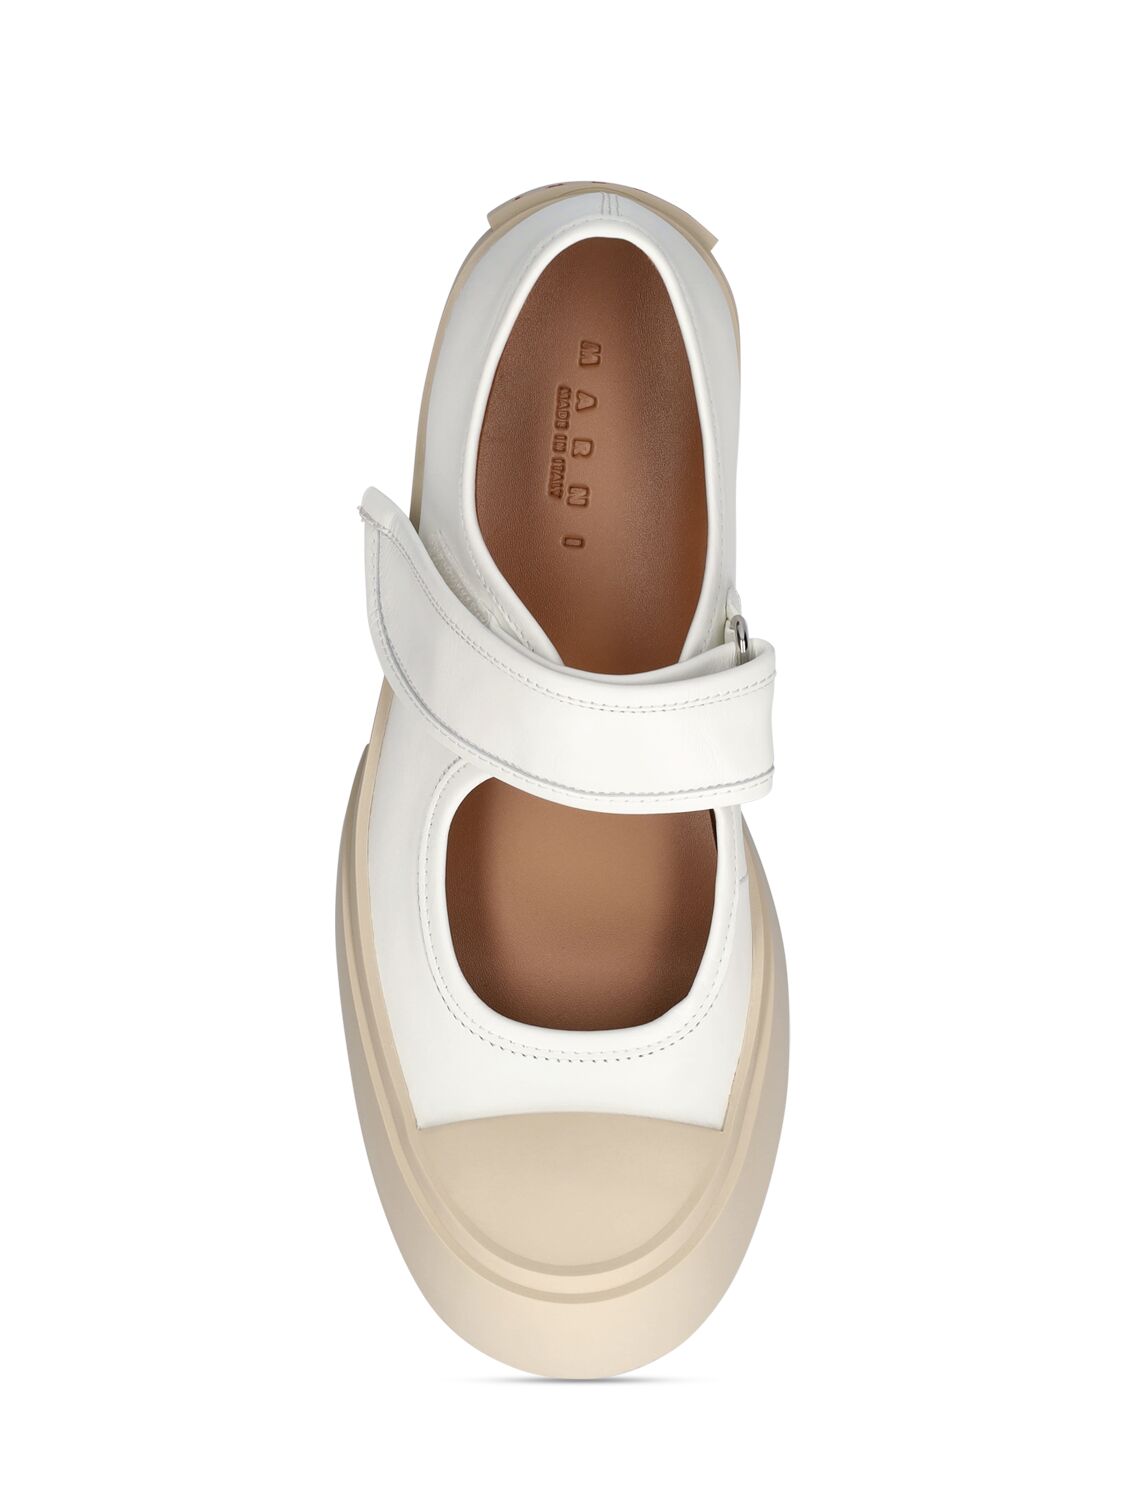 Shop Marni 20mm Pablo Mary Jane Leather Shoes In White